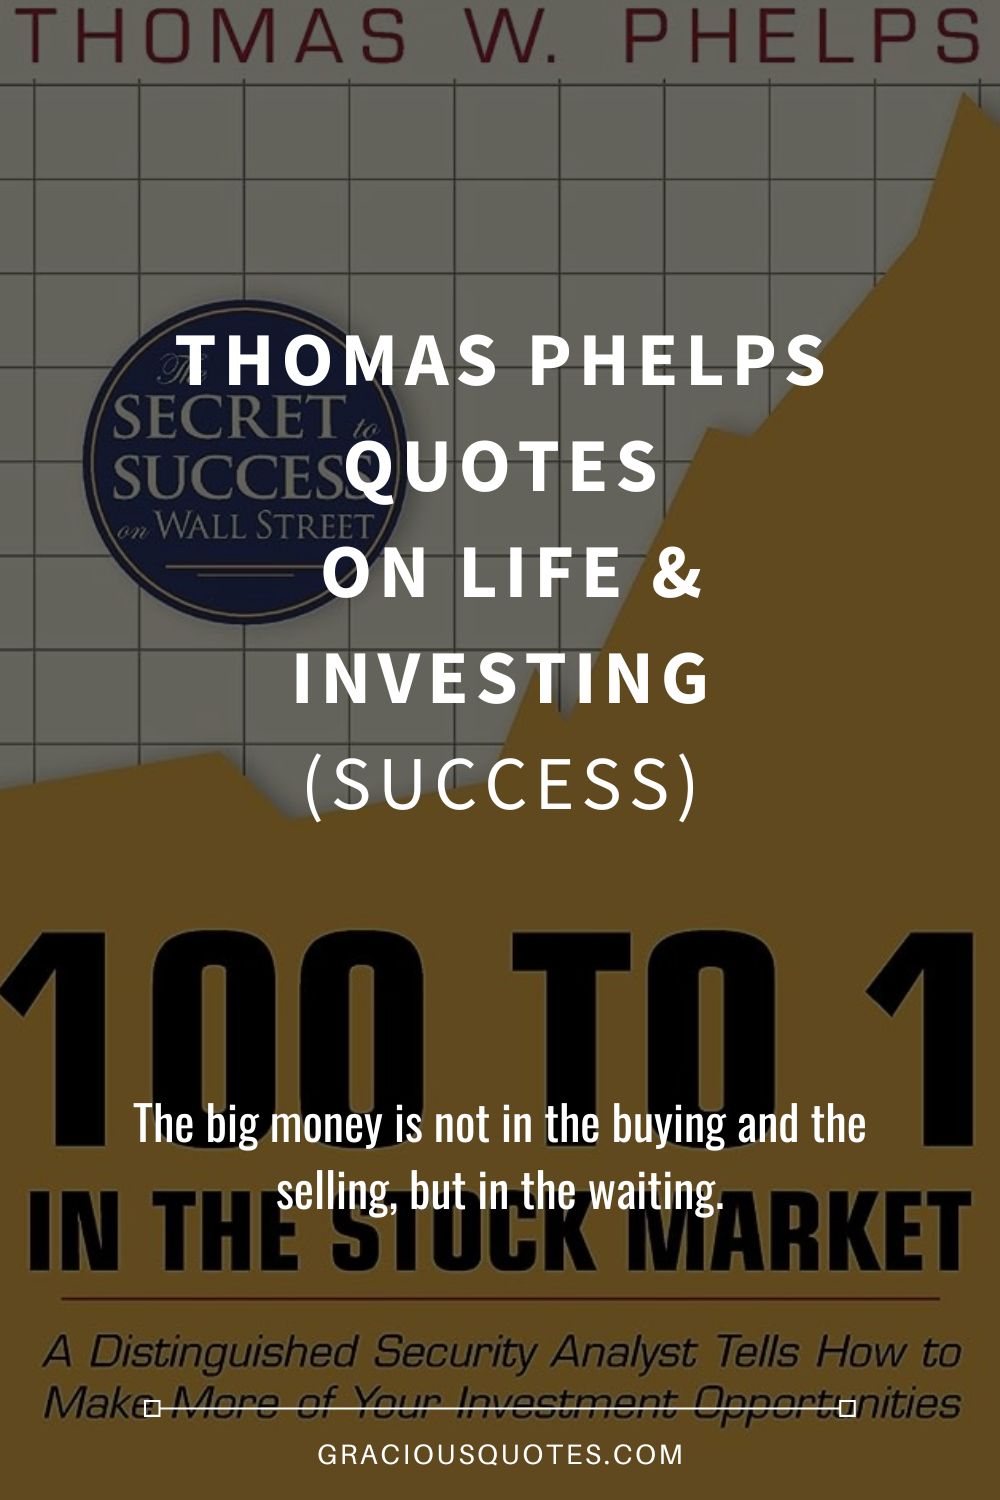 Thomas Phelps Quotes on Life & Investing (SUCCESS) - Gracious Quotes